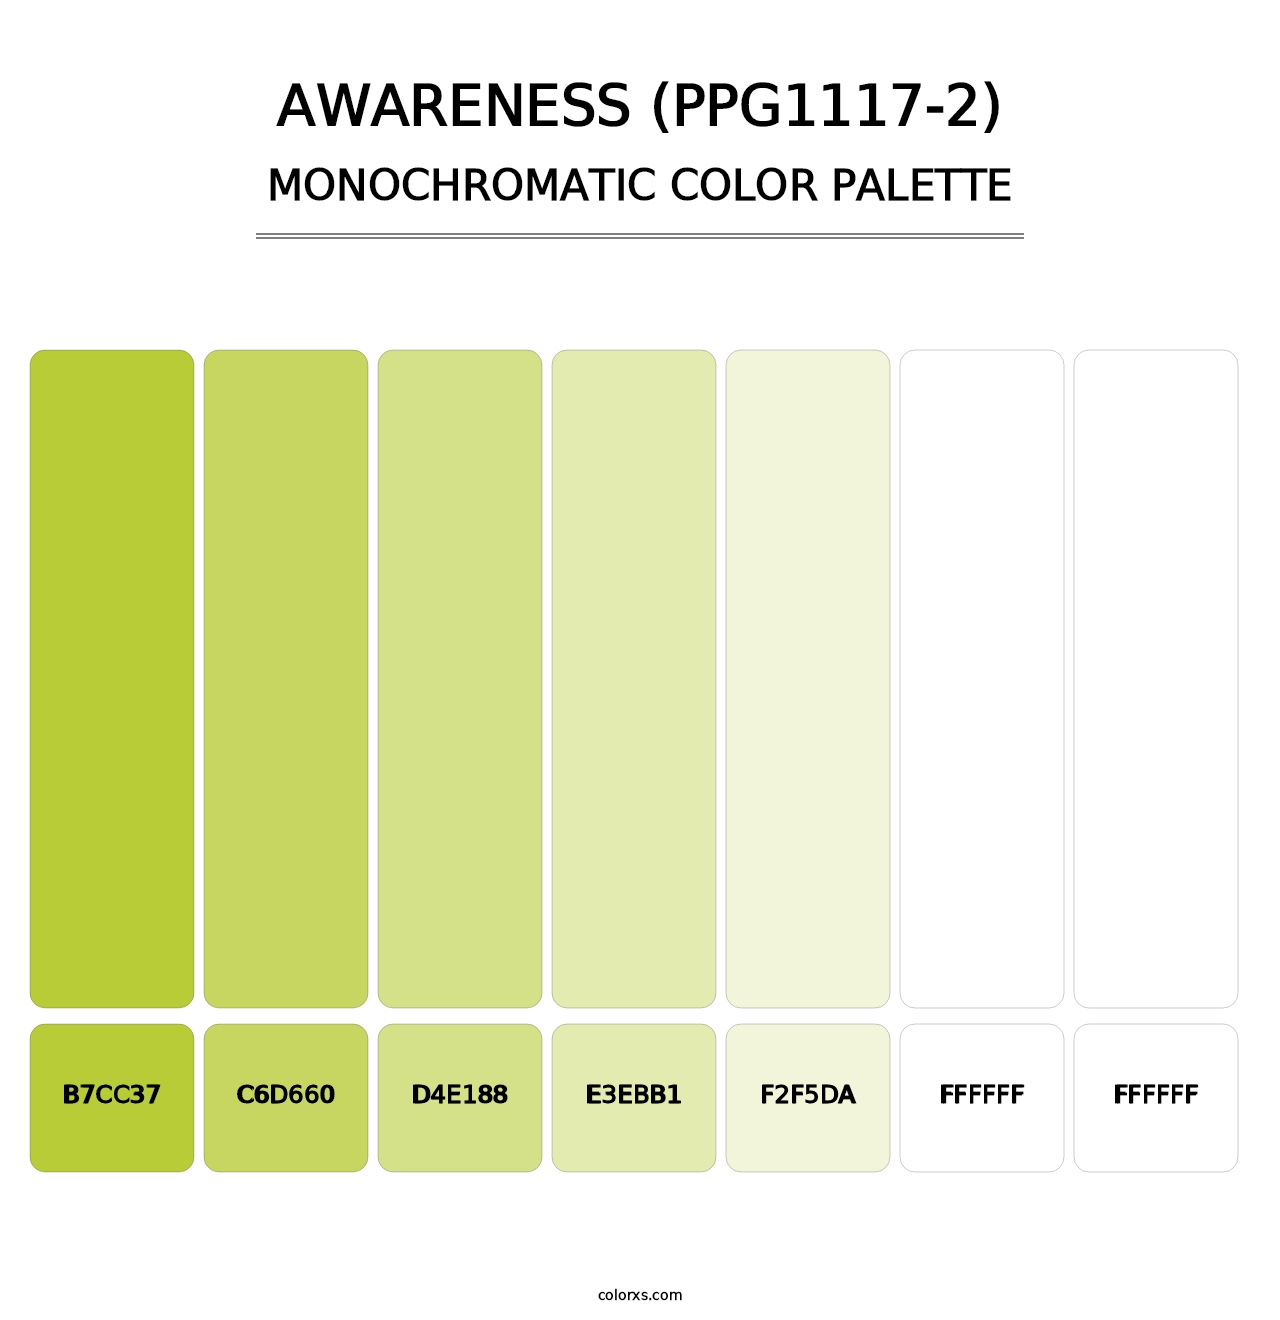 Awareness (PPG1117-2) - Monochromatic Color Palette